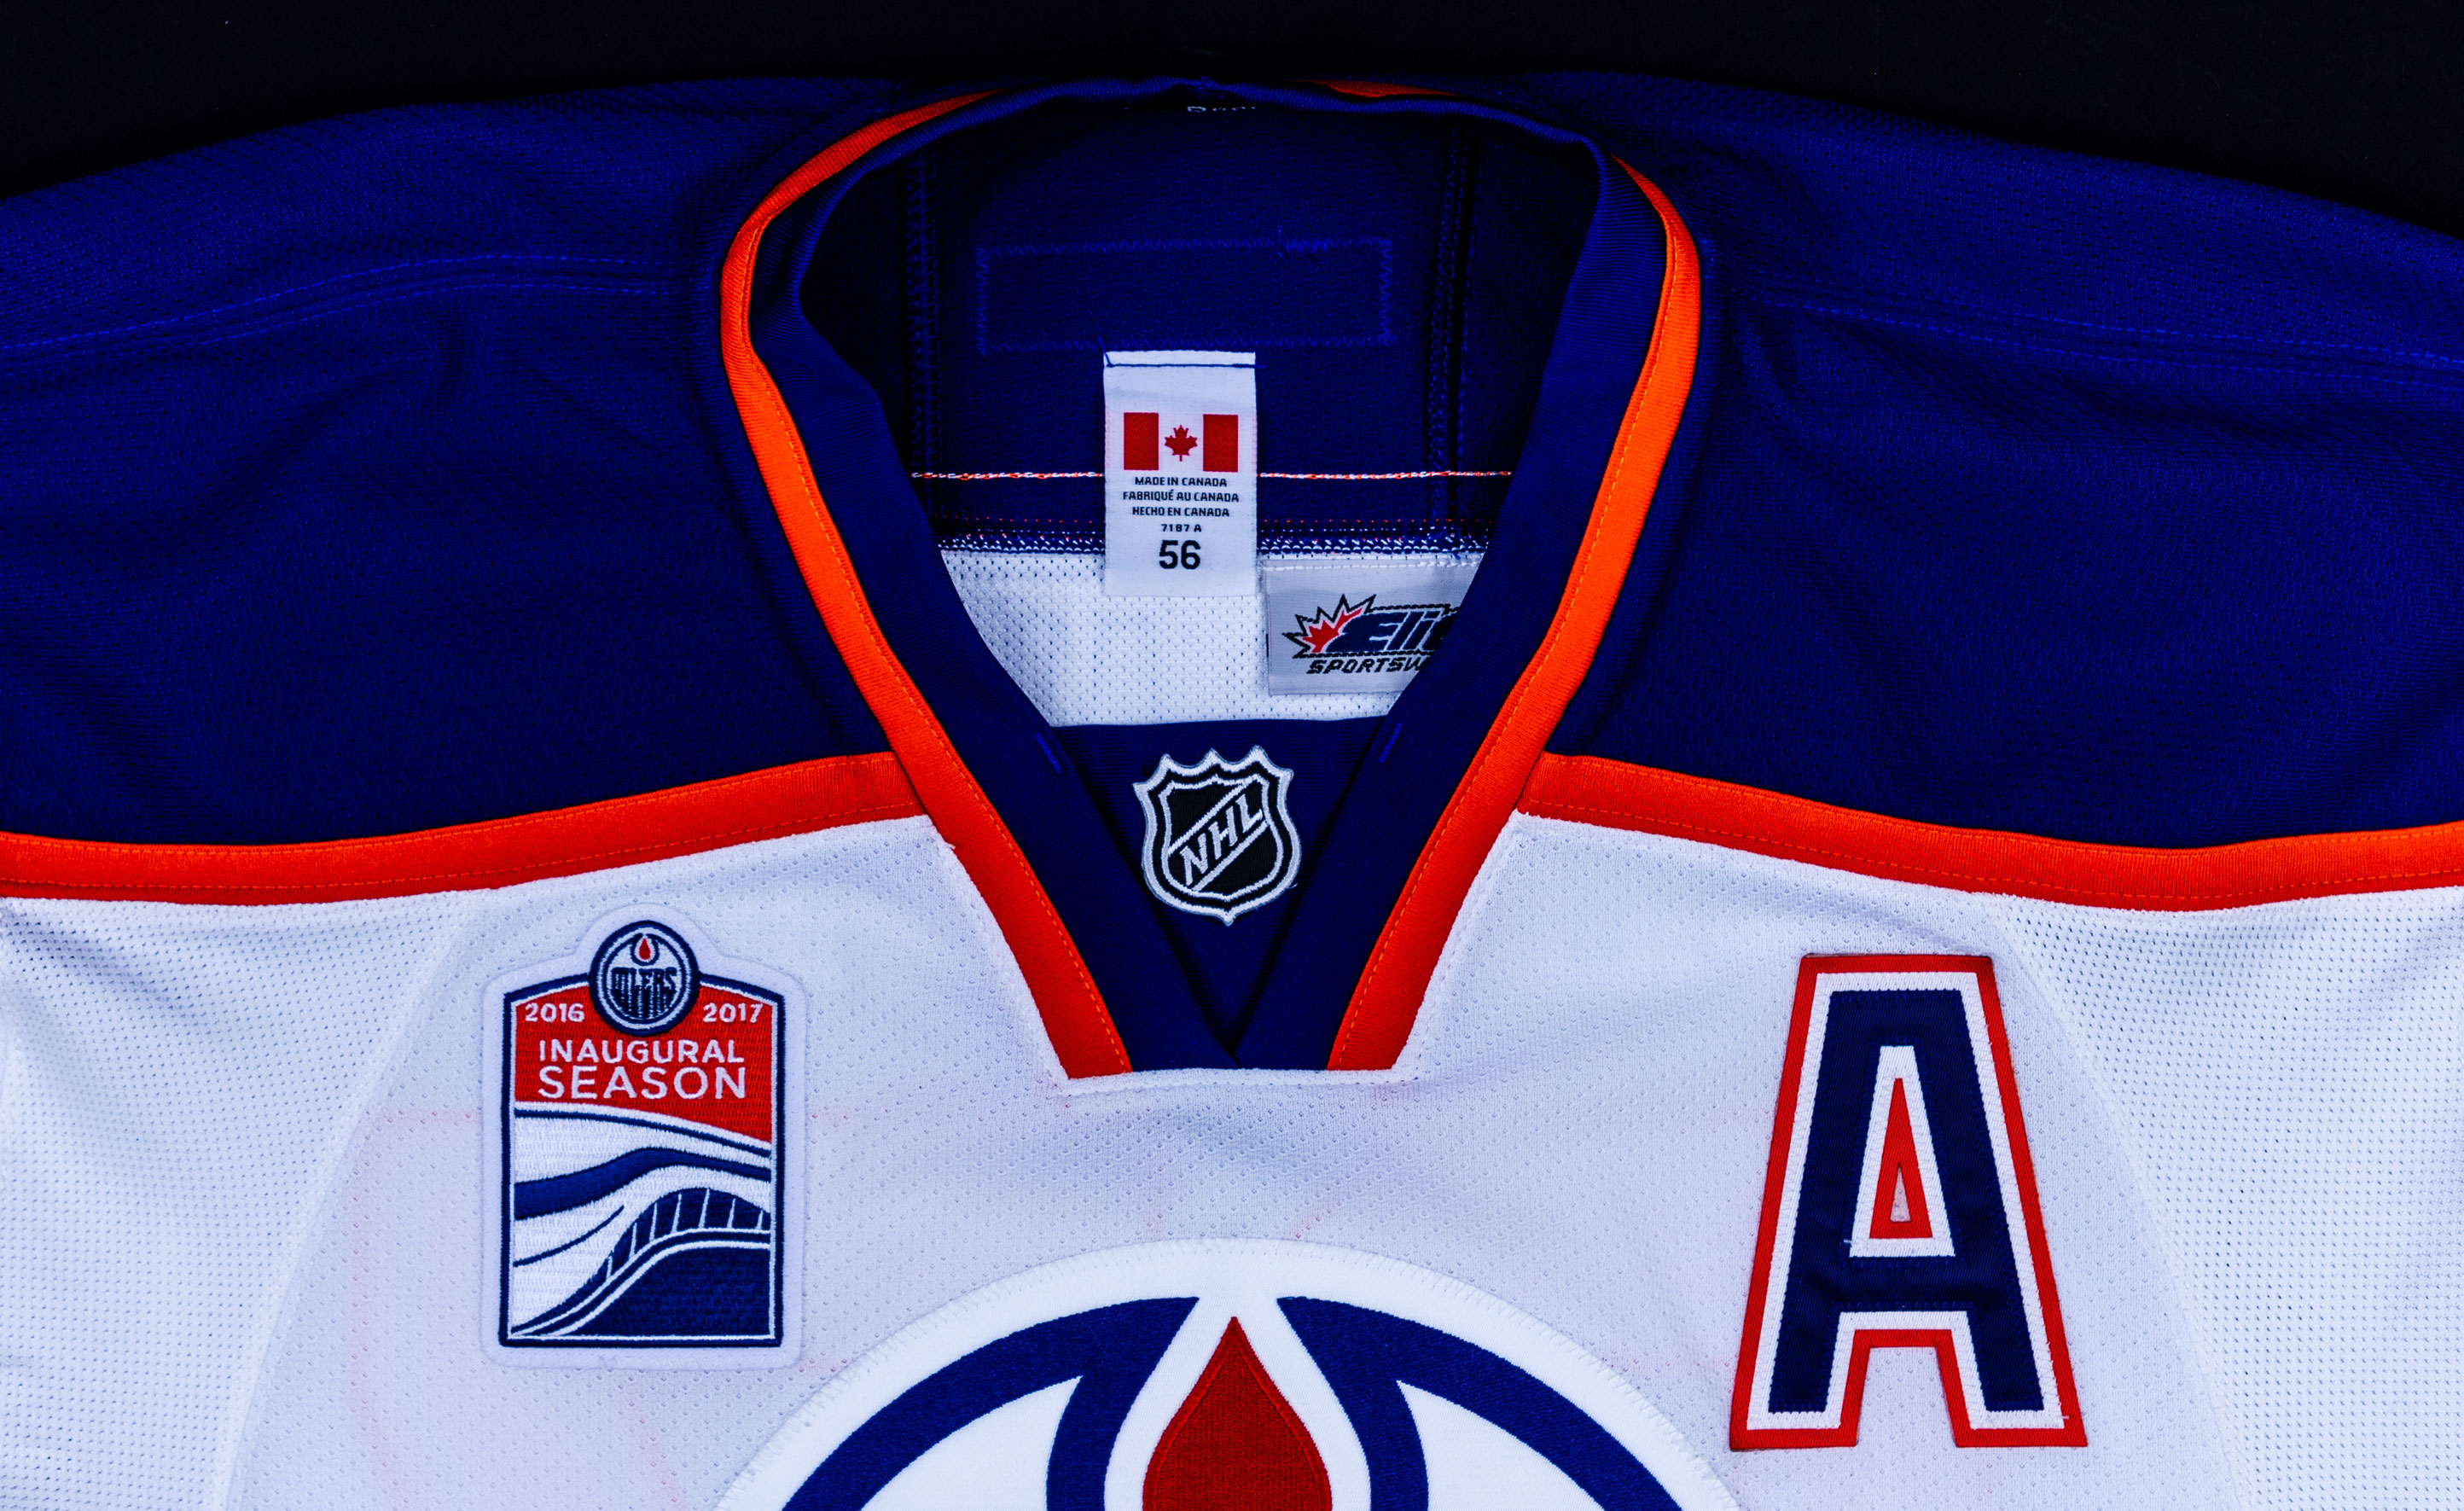 Edmonton Oilers Inaugural Season Jersey Patch At Rogers Place 2016